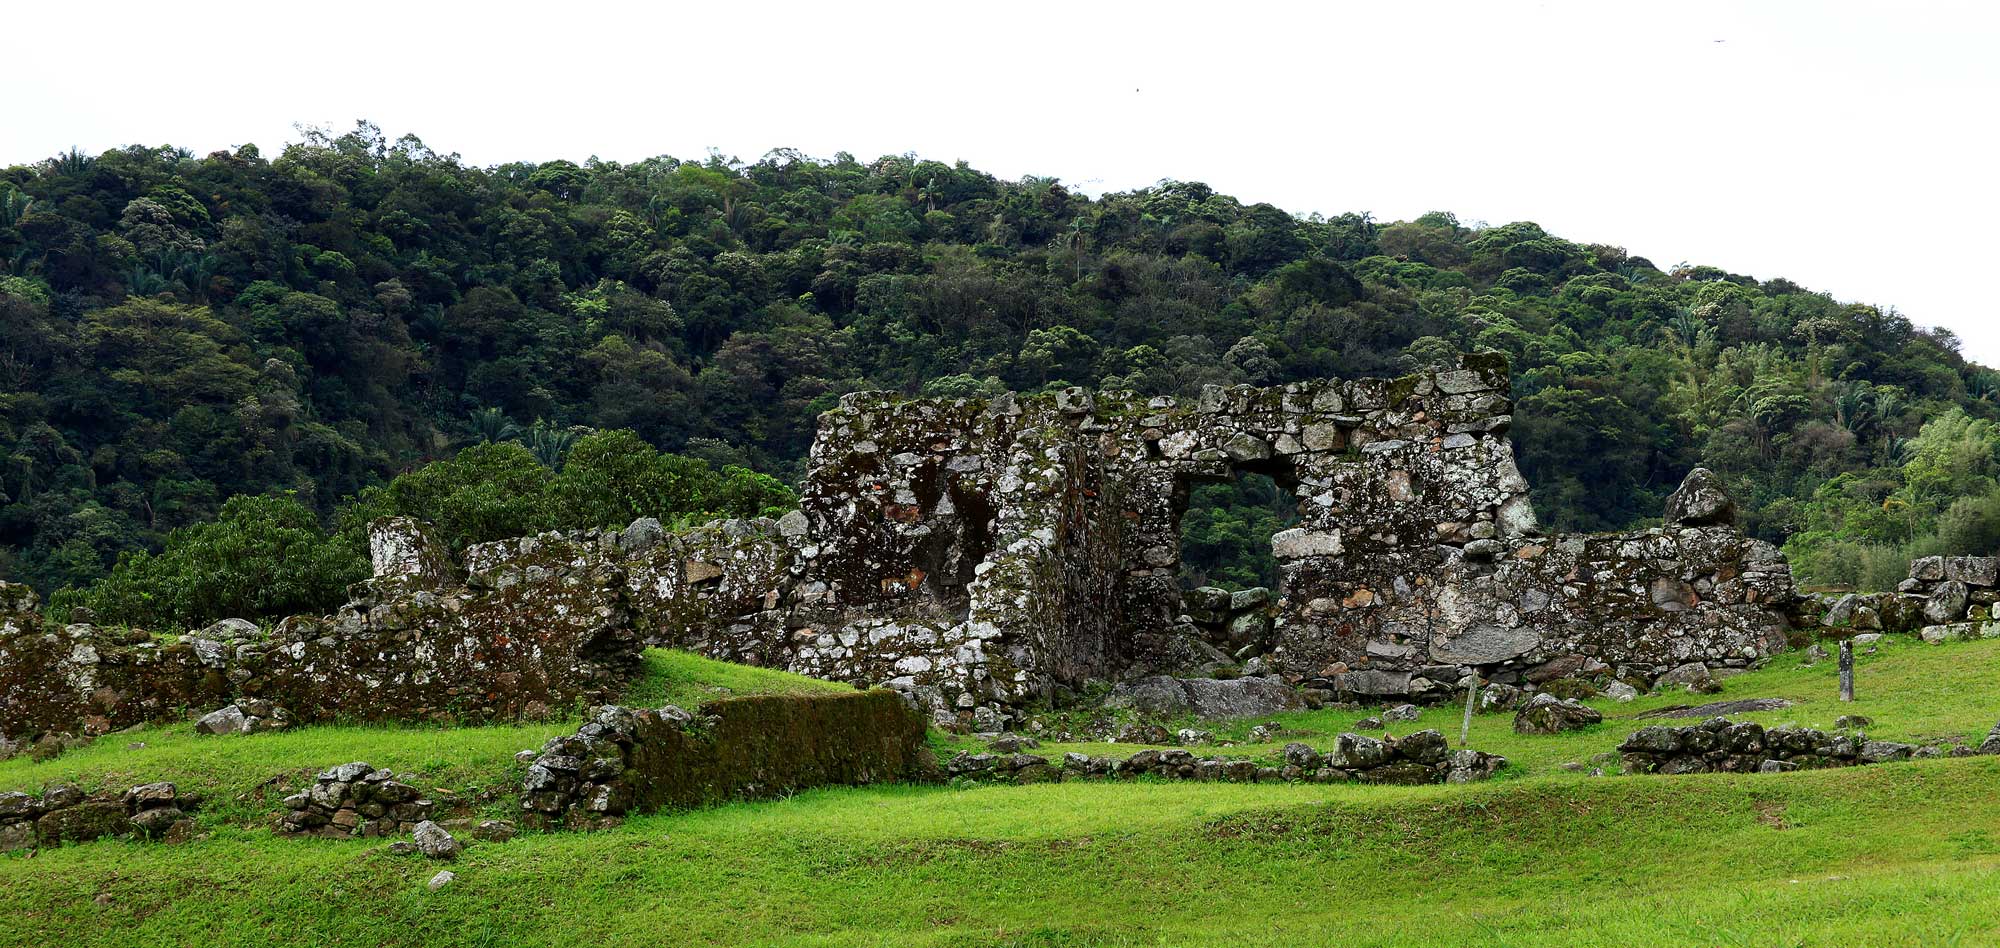 Ruins of a stone sugar mill in Brazil, from a mill first constructed in 1534. The photo shows part of a stone building with a green lawn surrounding it, and a forested hill rising behind it.